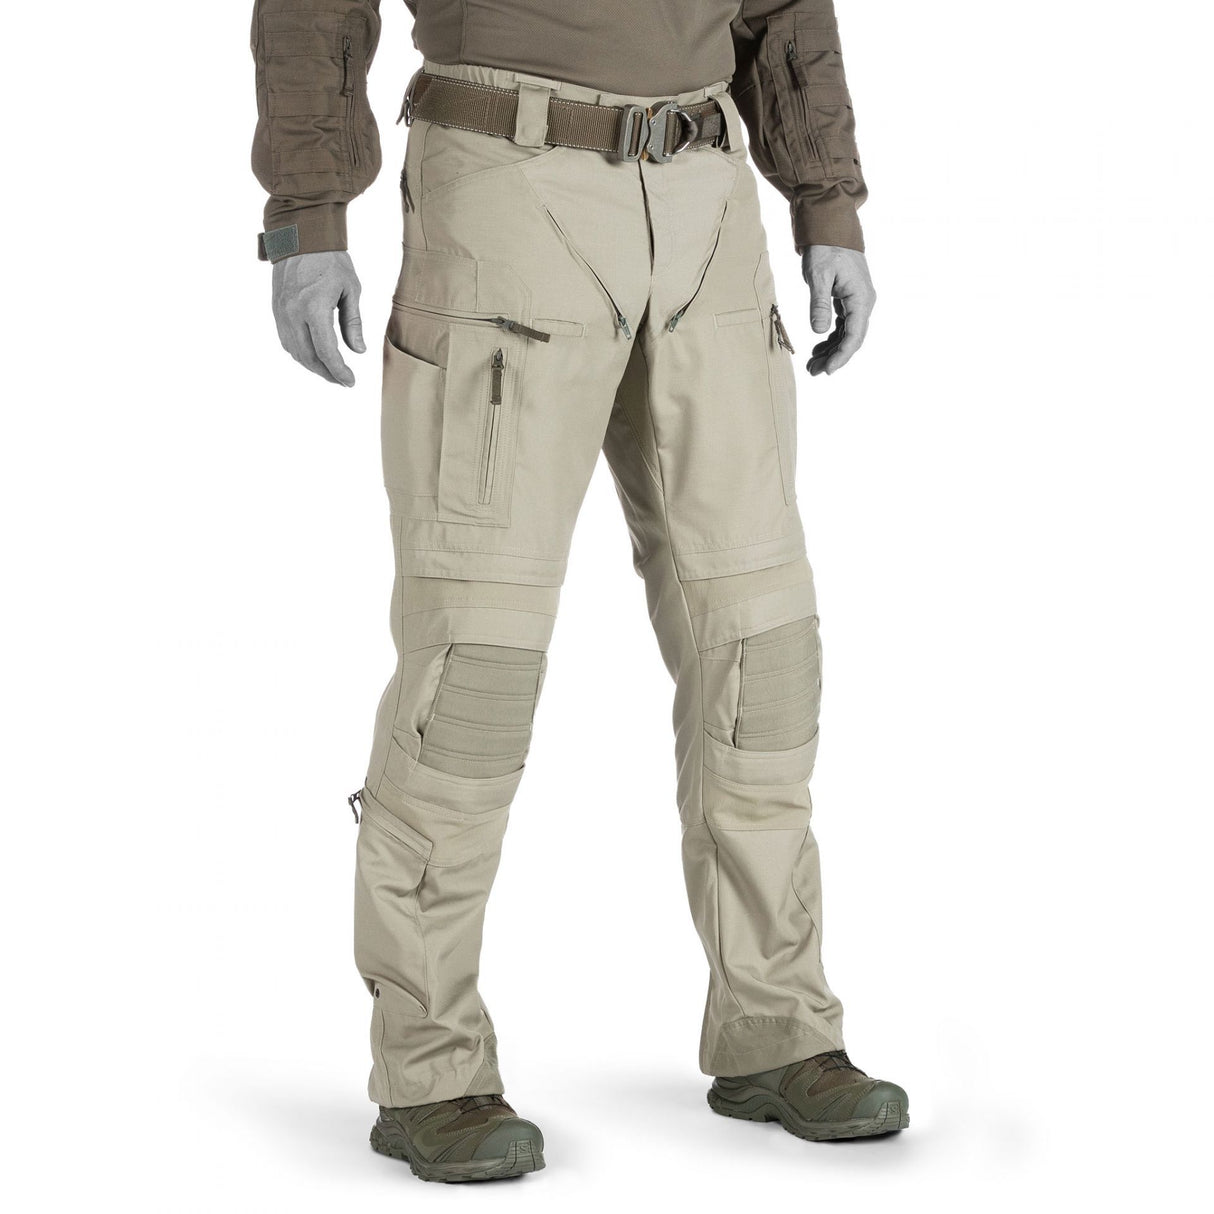 Tactical Legwear: UF PRO 3-layer knee protection, functional pockets, connectivity options.